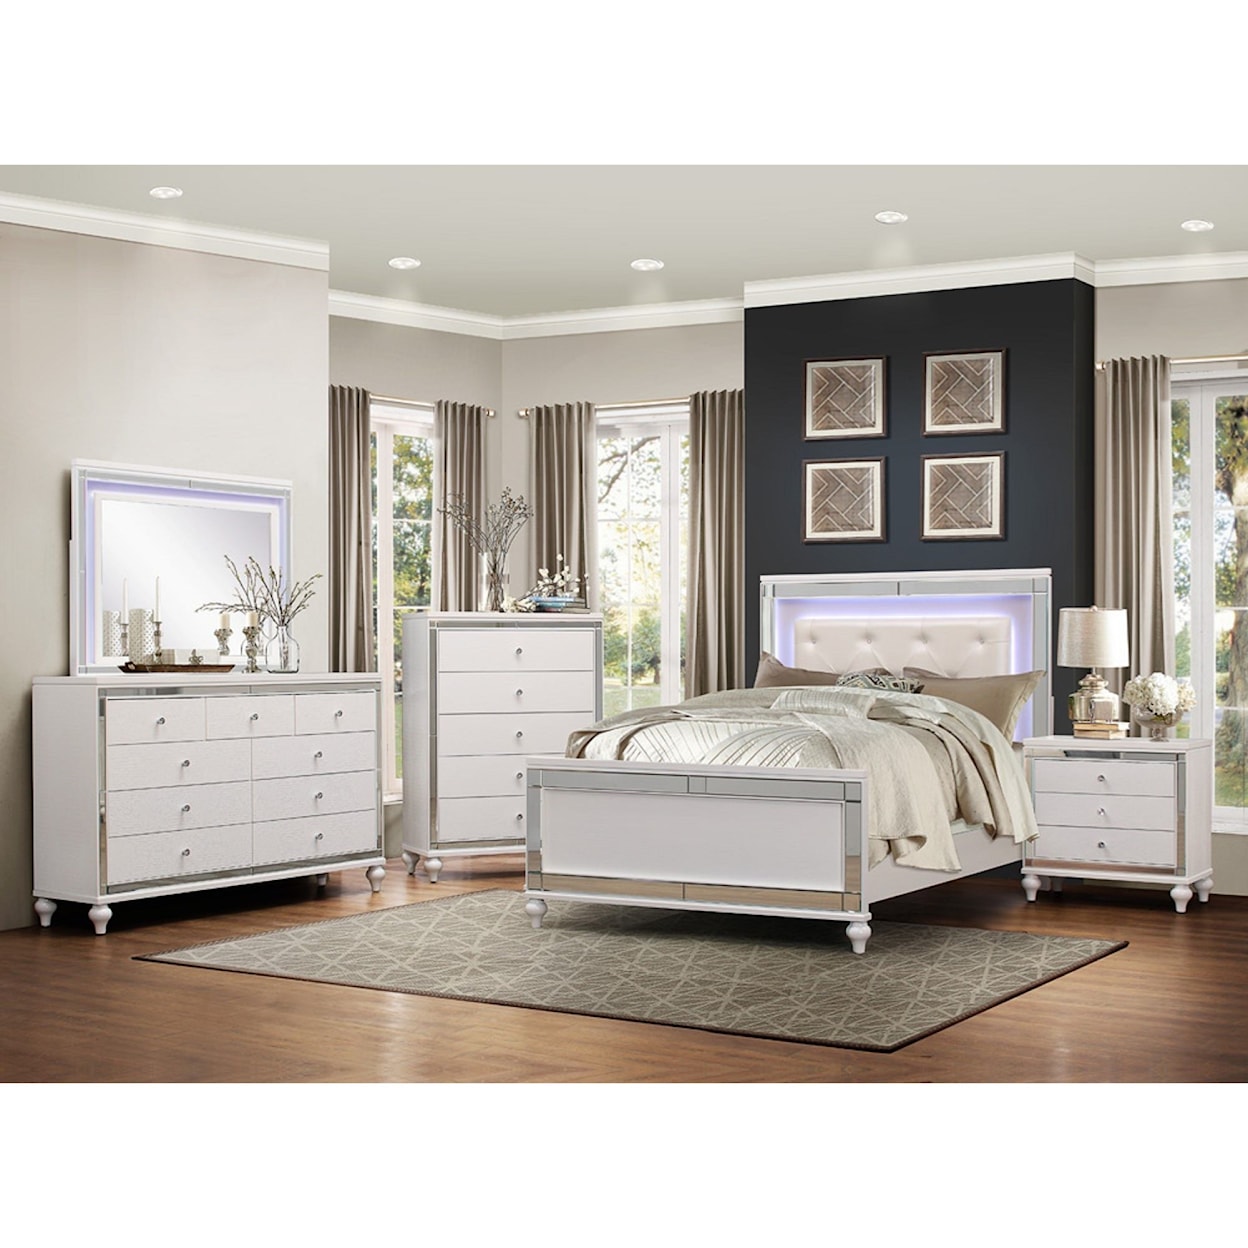 Homelegance Furniture Alonza King Bedroom Group without Chest